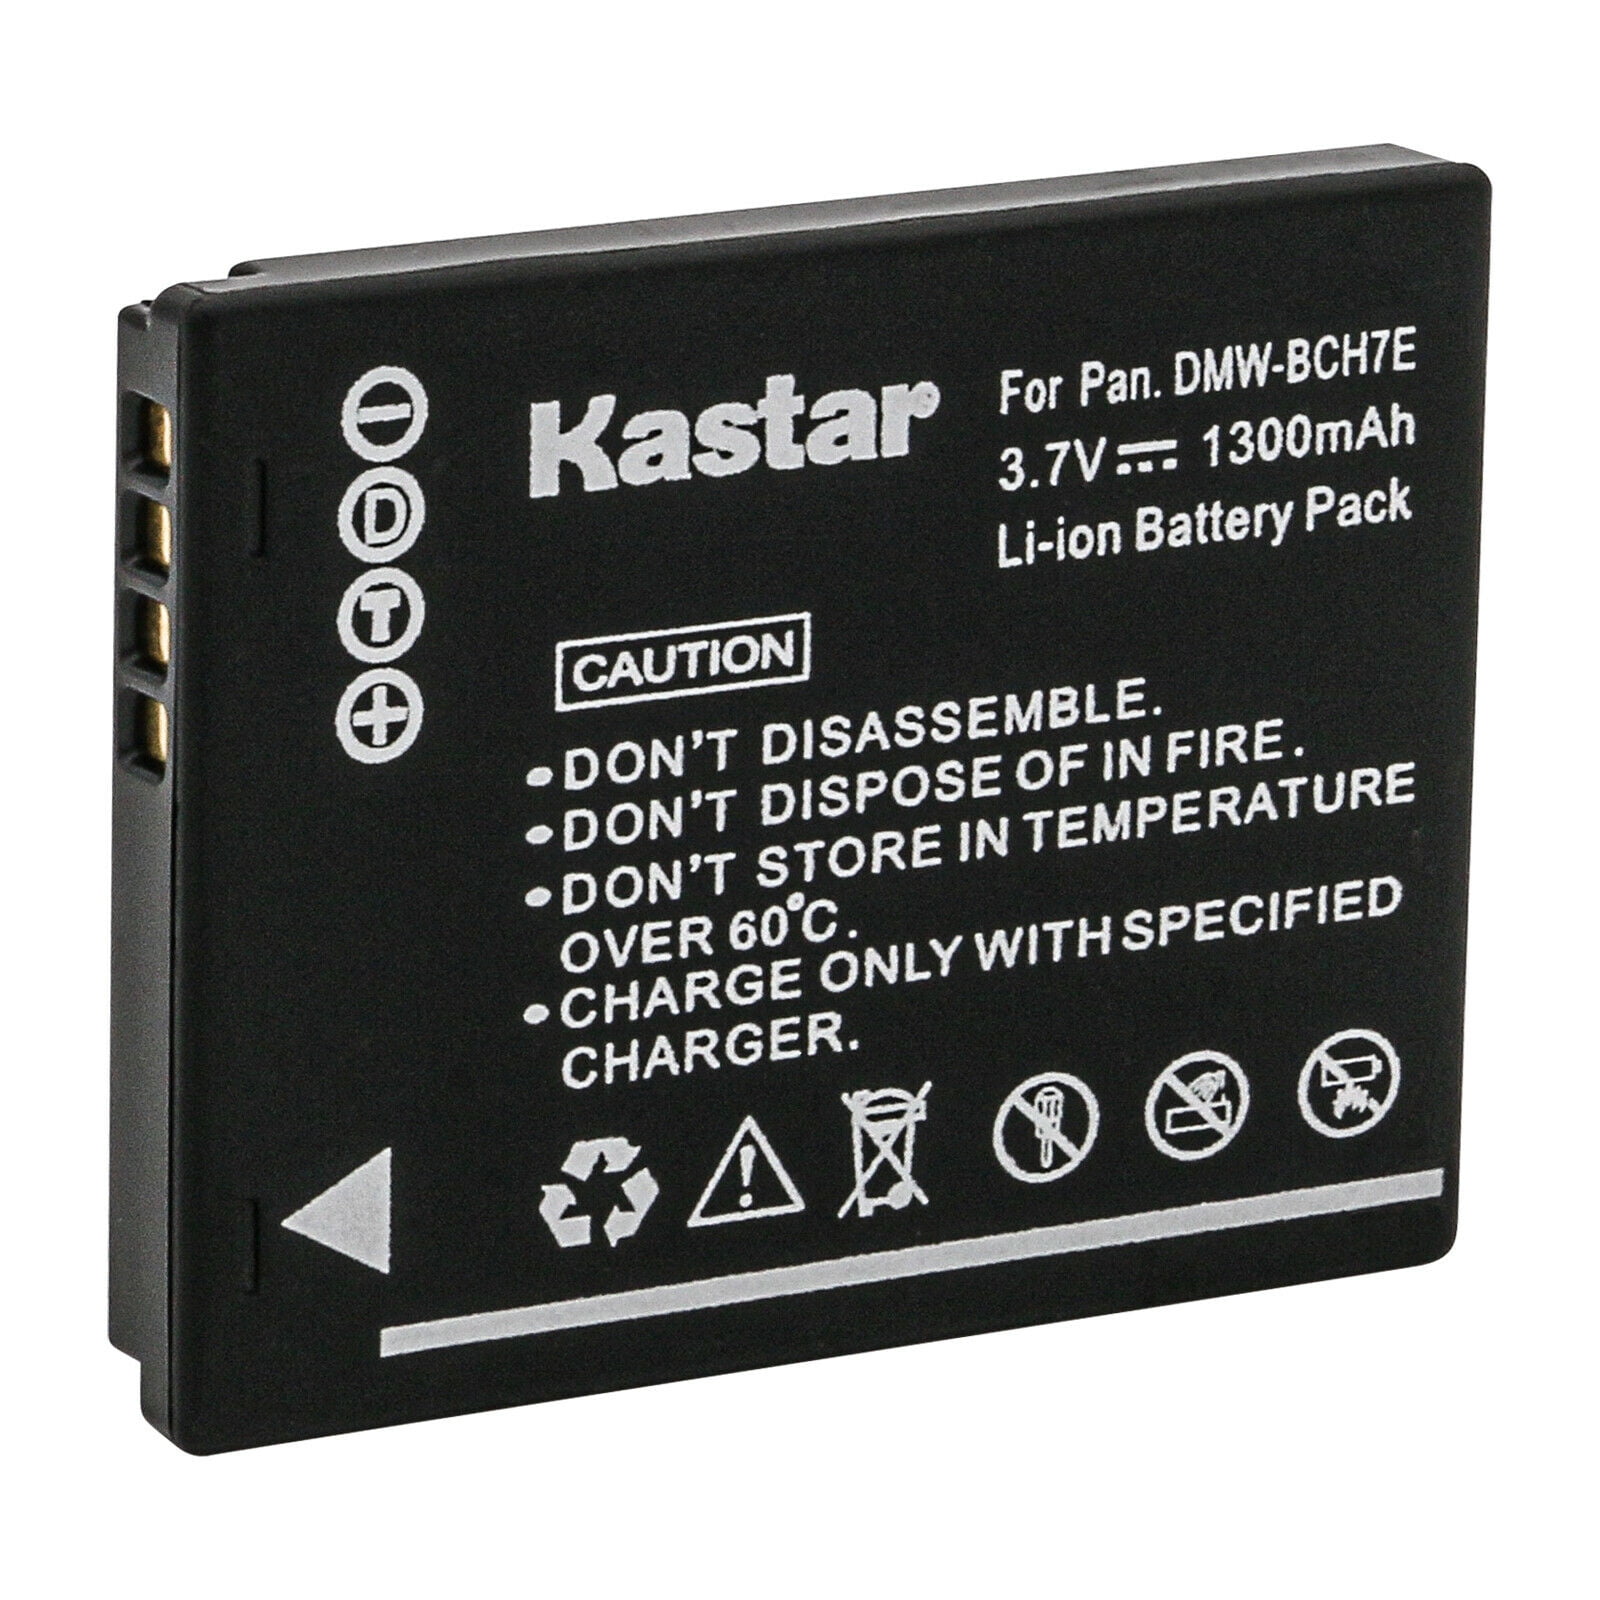 Kastar 1-Pack DMW-BCH7E Battery Replacement for Panasonic DMW-BCH7 DMW-BCH7E,  DMW-BCH7PP DMW-BCH7GK Battery, Panasonic DE-A75 DE-A75B, DE-A76 Charger 